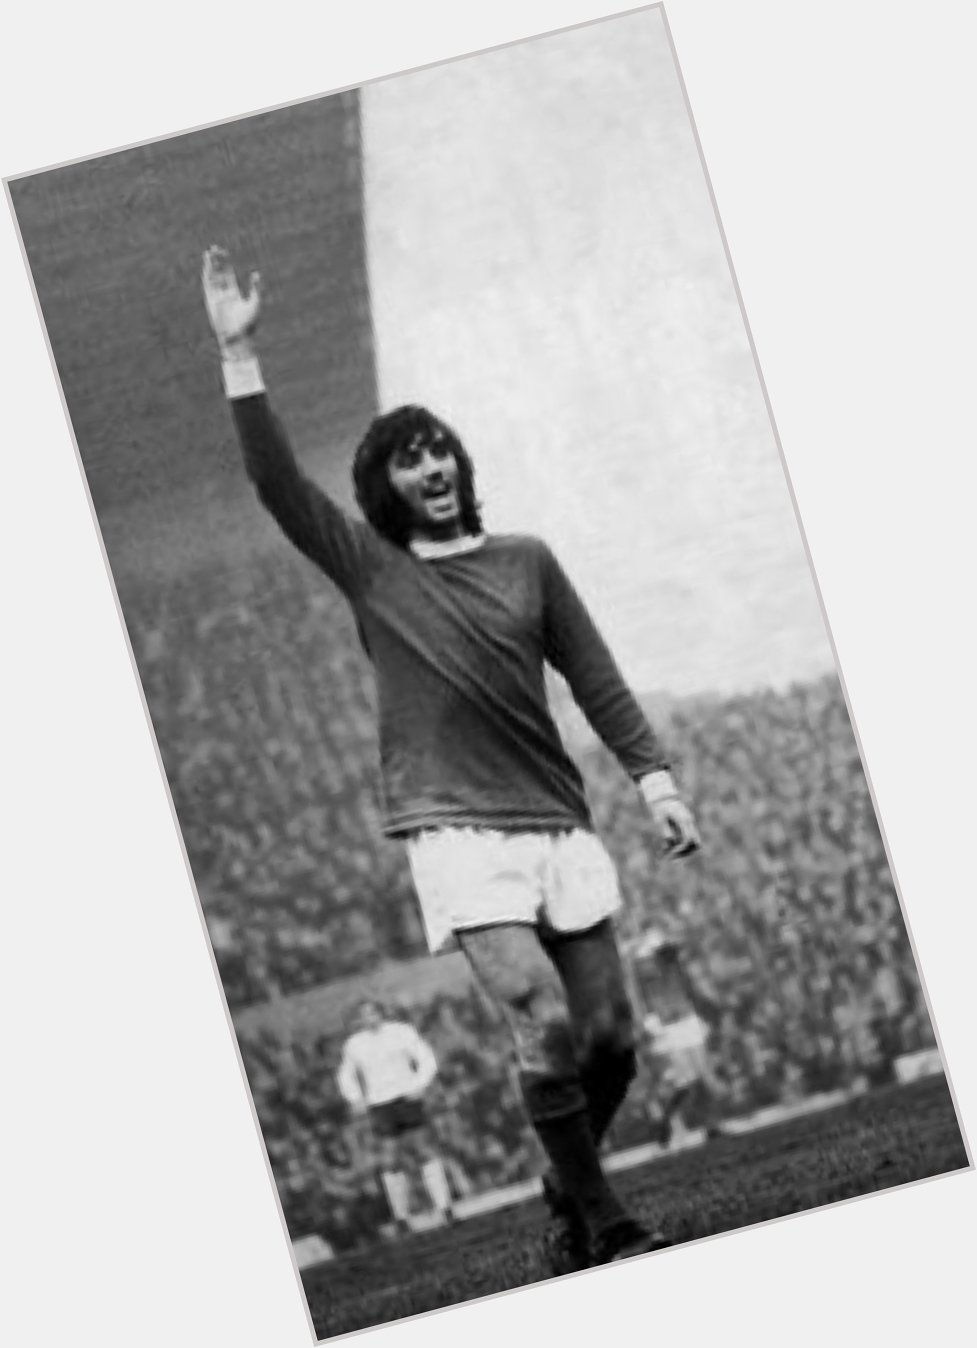 Happy Birthday to the football Genius that is George best      . 